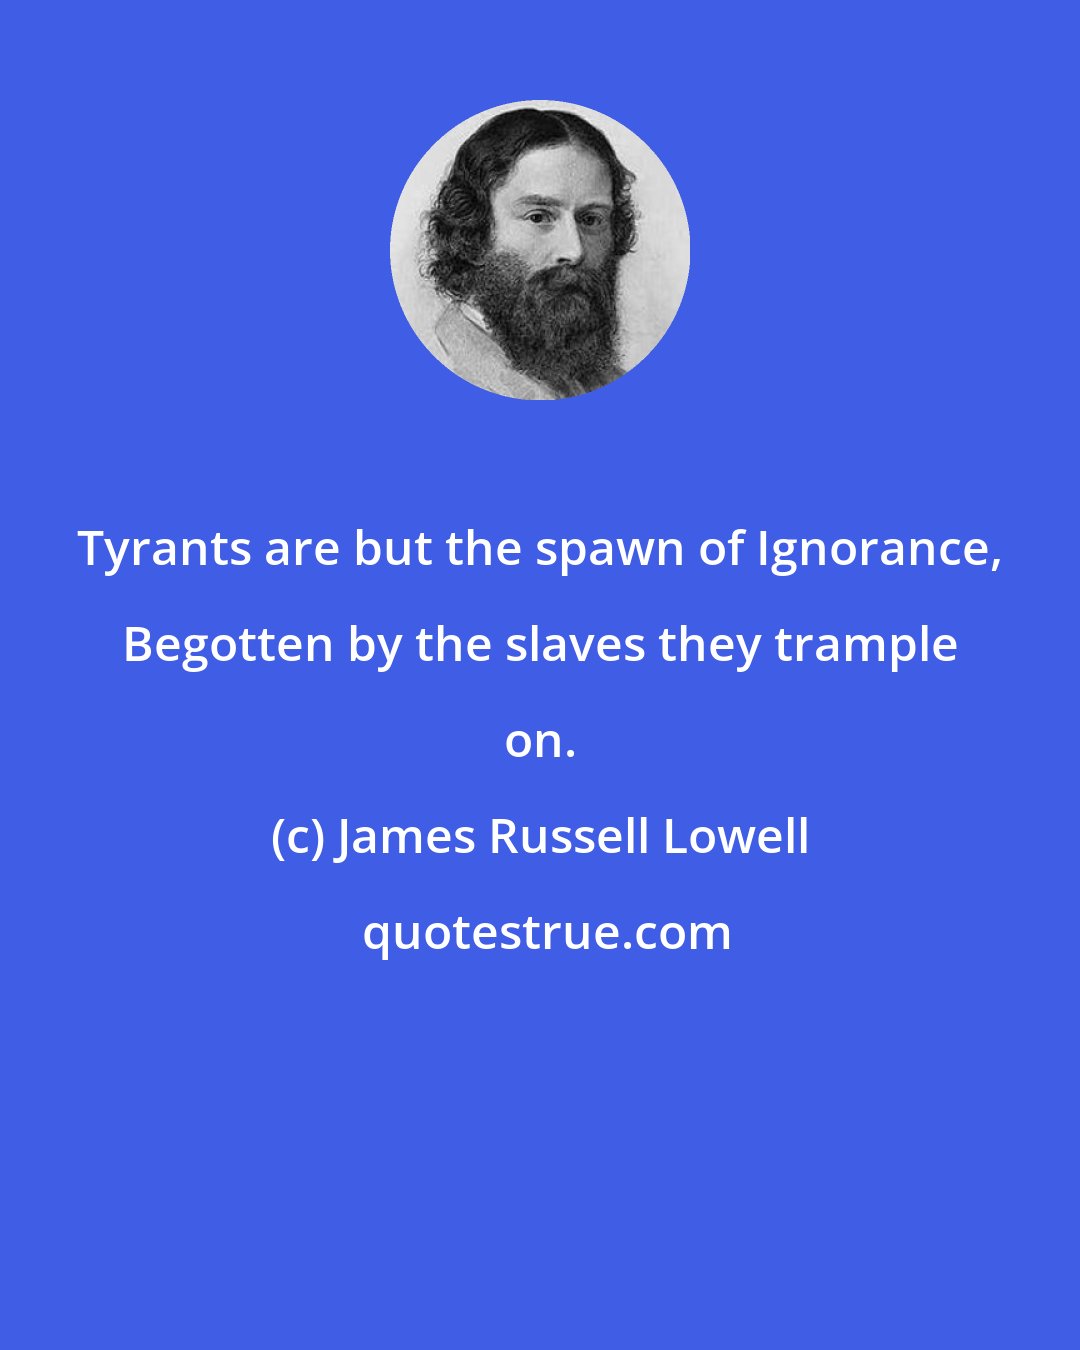 James Russell Lowell: Tyrants are but the spawn of Ignorance, Begotten by the slaves they trample on.